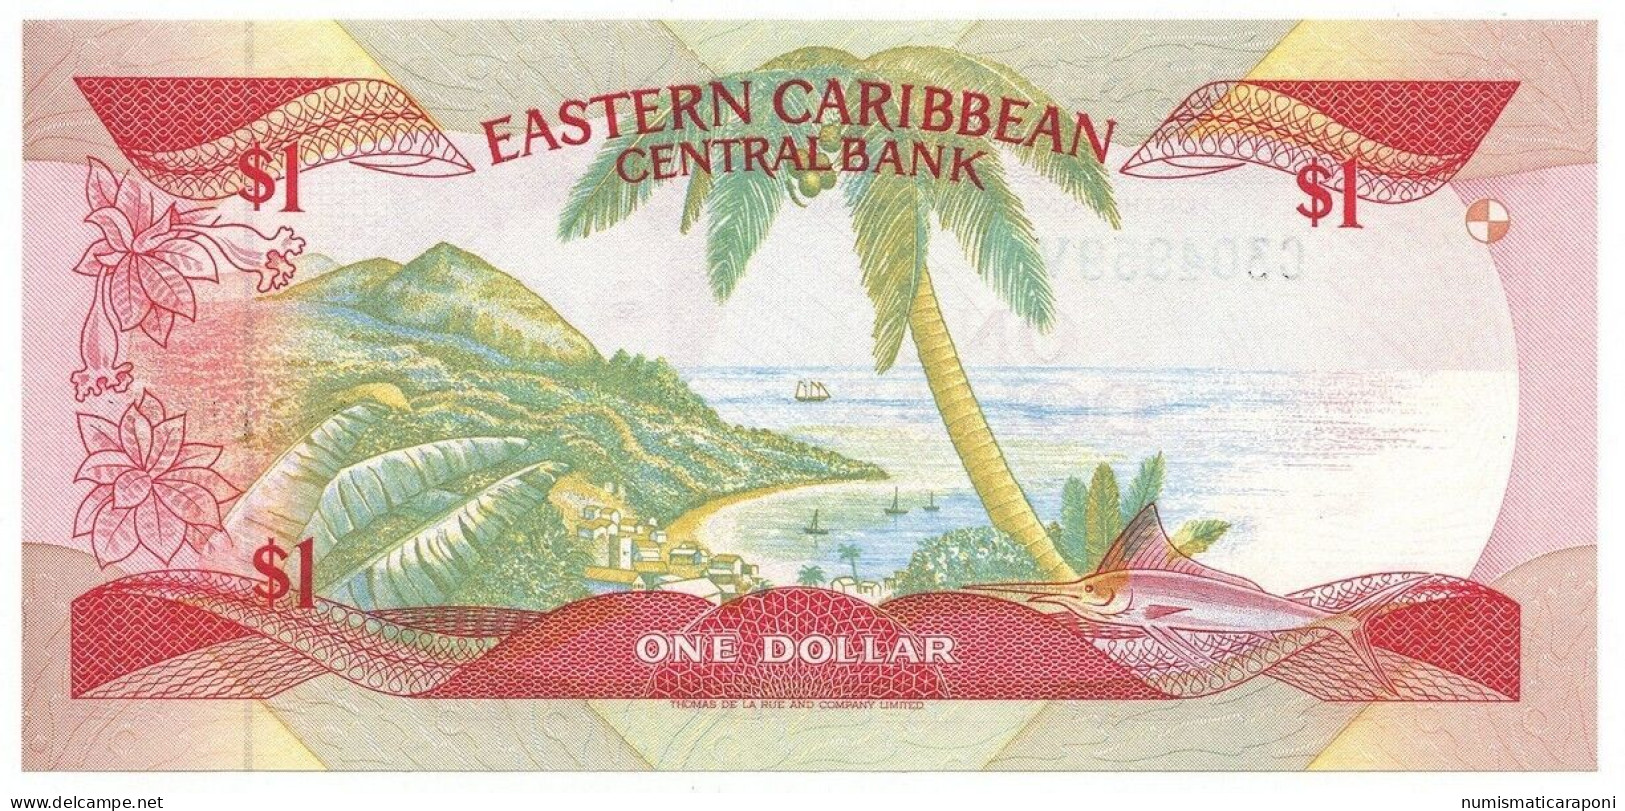 1 DOLLAR EASTERN CARIBBEAN CENTRAL BANK 1985/88 FDS Lotto.591 - Caraïbes Orientales